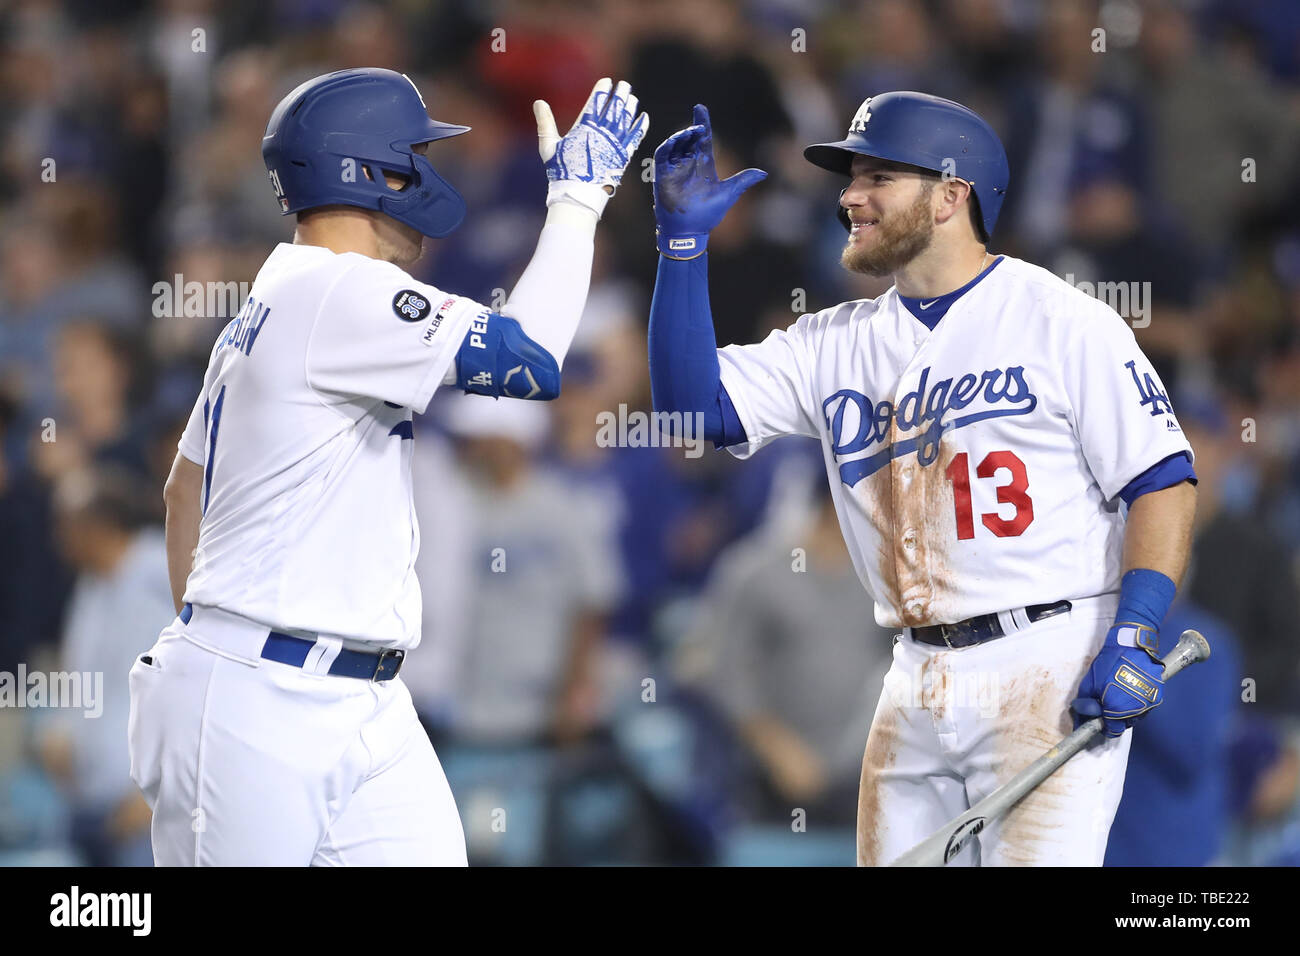 Los Angeles, CA, USA. 31st May, 2019. Los Angeles Dodgers left